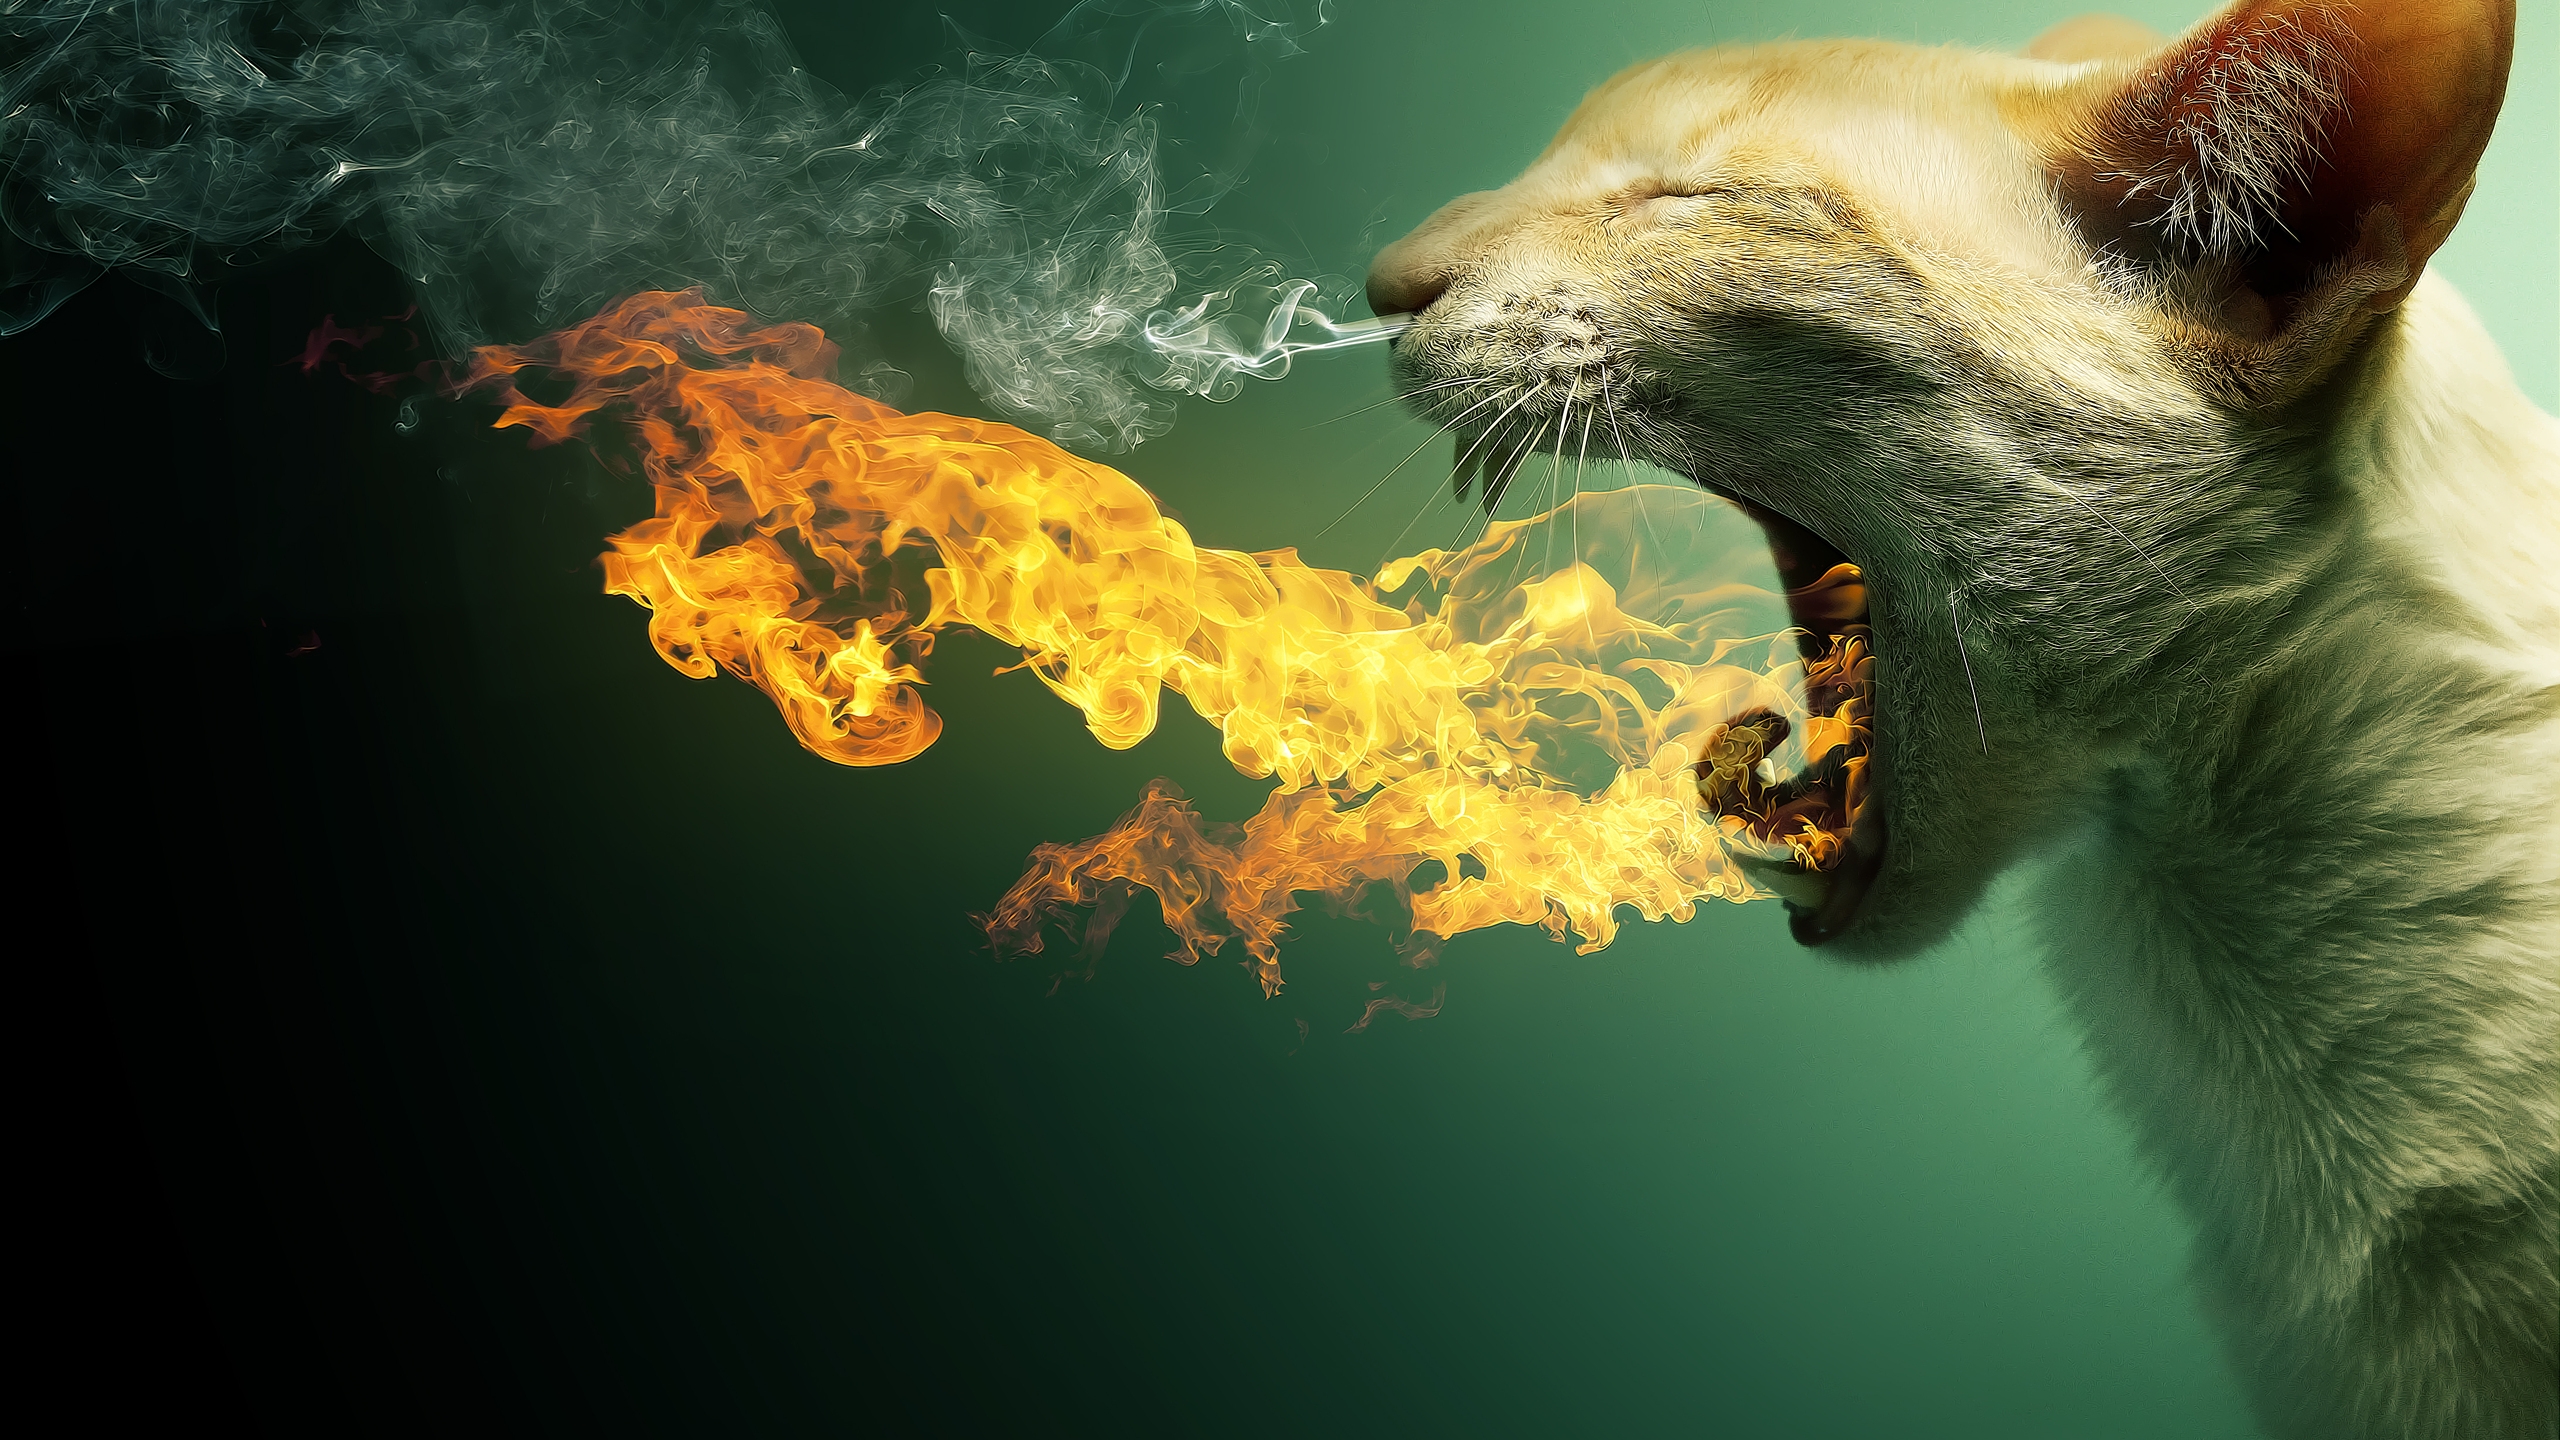 Cat in Fire for 2560x1440 HDTV resolution